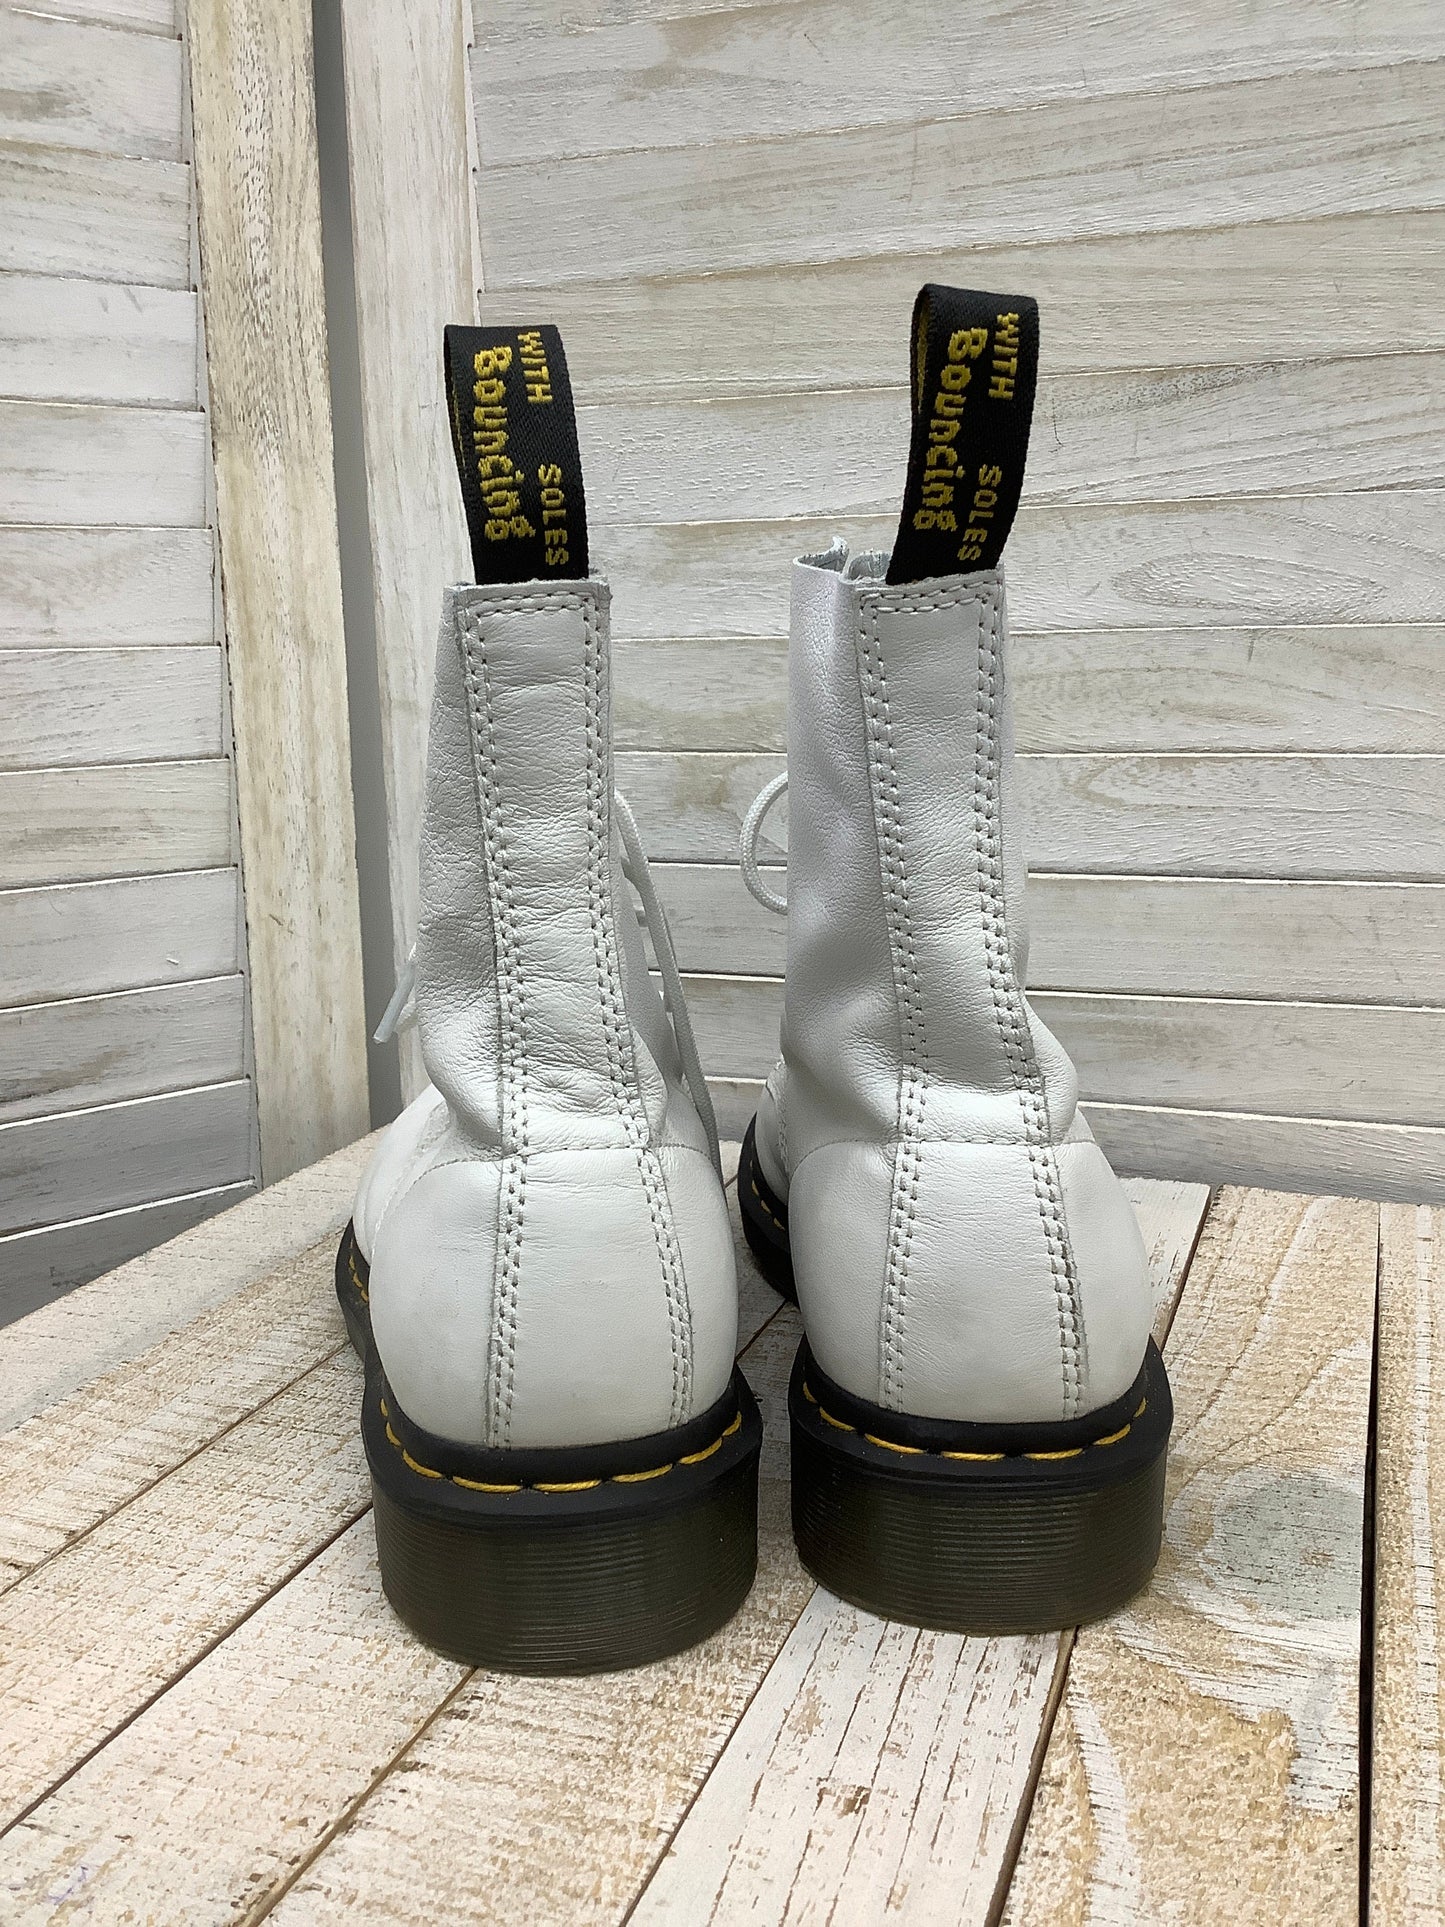 Boots Ankle Flats By Dr Martens  Size: 9